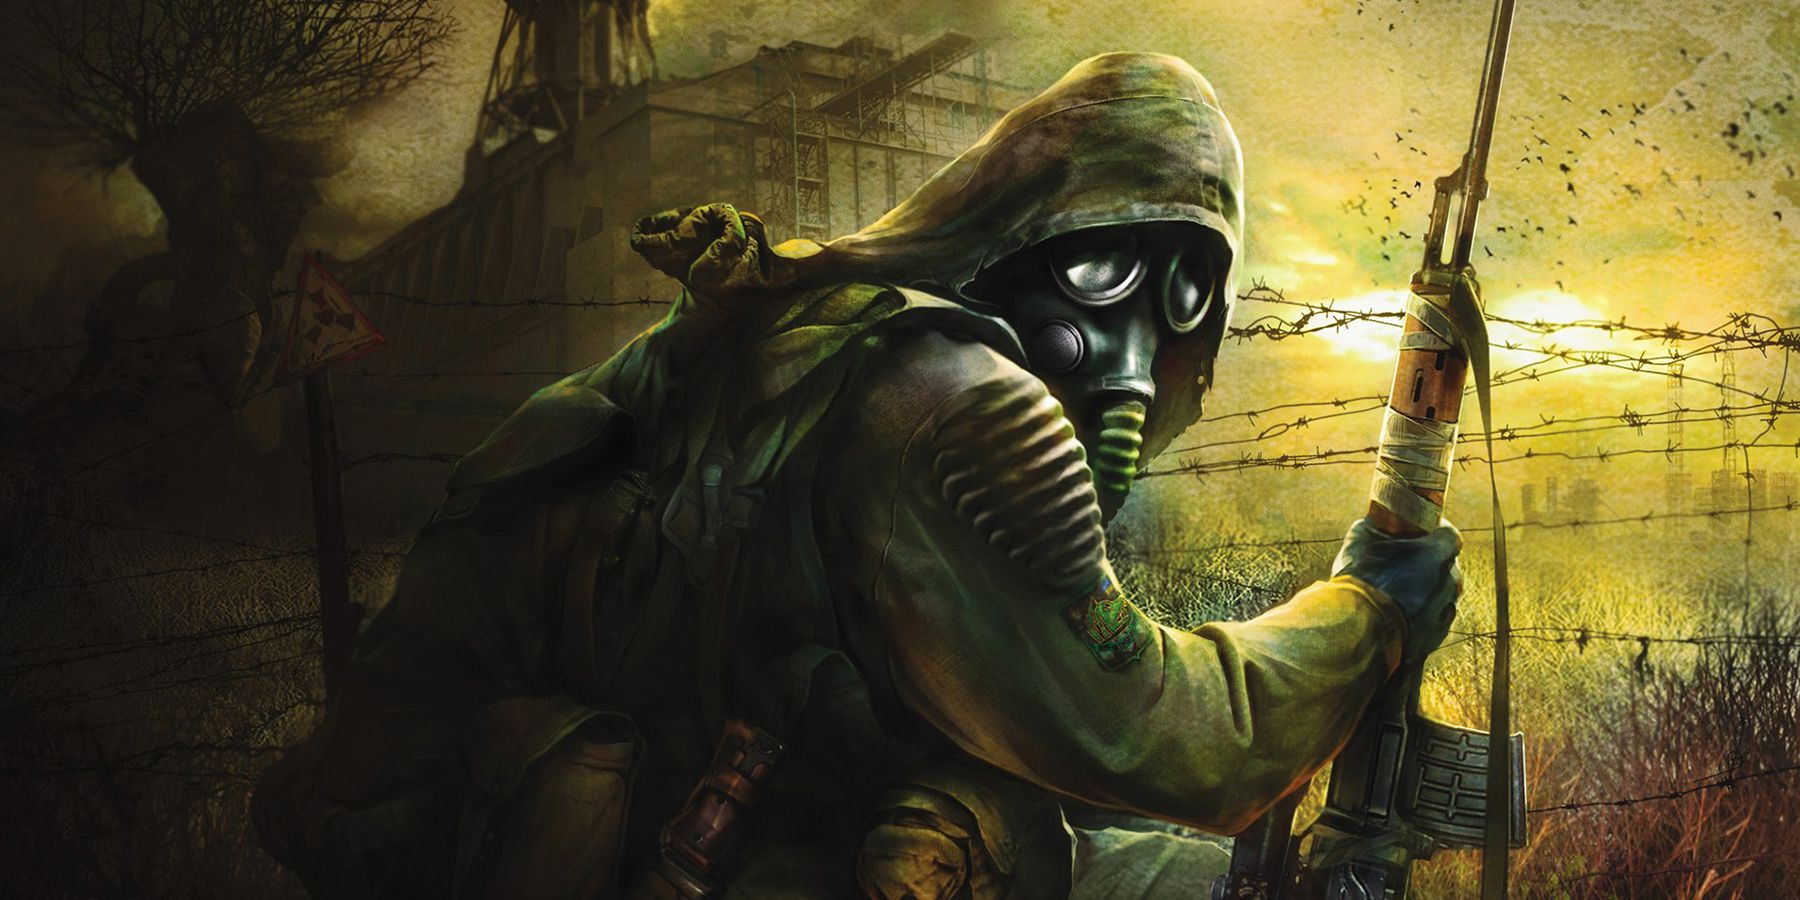 Art from STALKER: Shadow of Chernobyl depicting a gas-mask wearing figure holding a rifle and over their shoulder towards the camera.